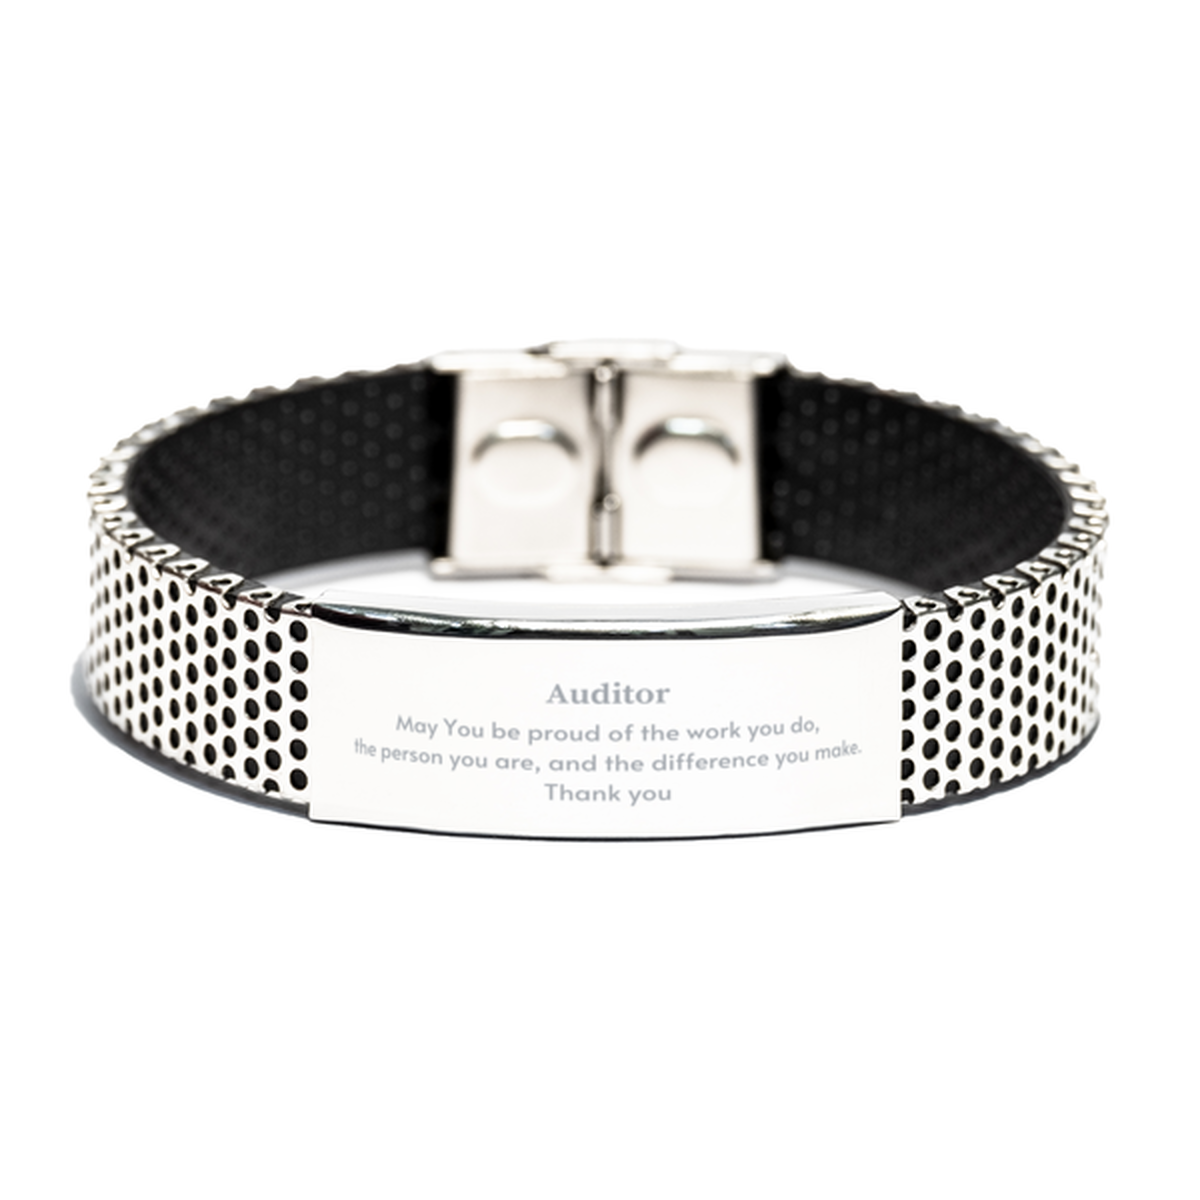 Heartwarming Stainless Steel Bracelet Retirement Coworkers Gifts for Auditor, Auditor May You be proud of the work you do, the person you are Gifts for Boss Men Women Friends